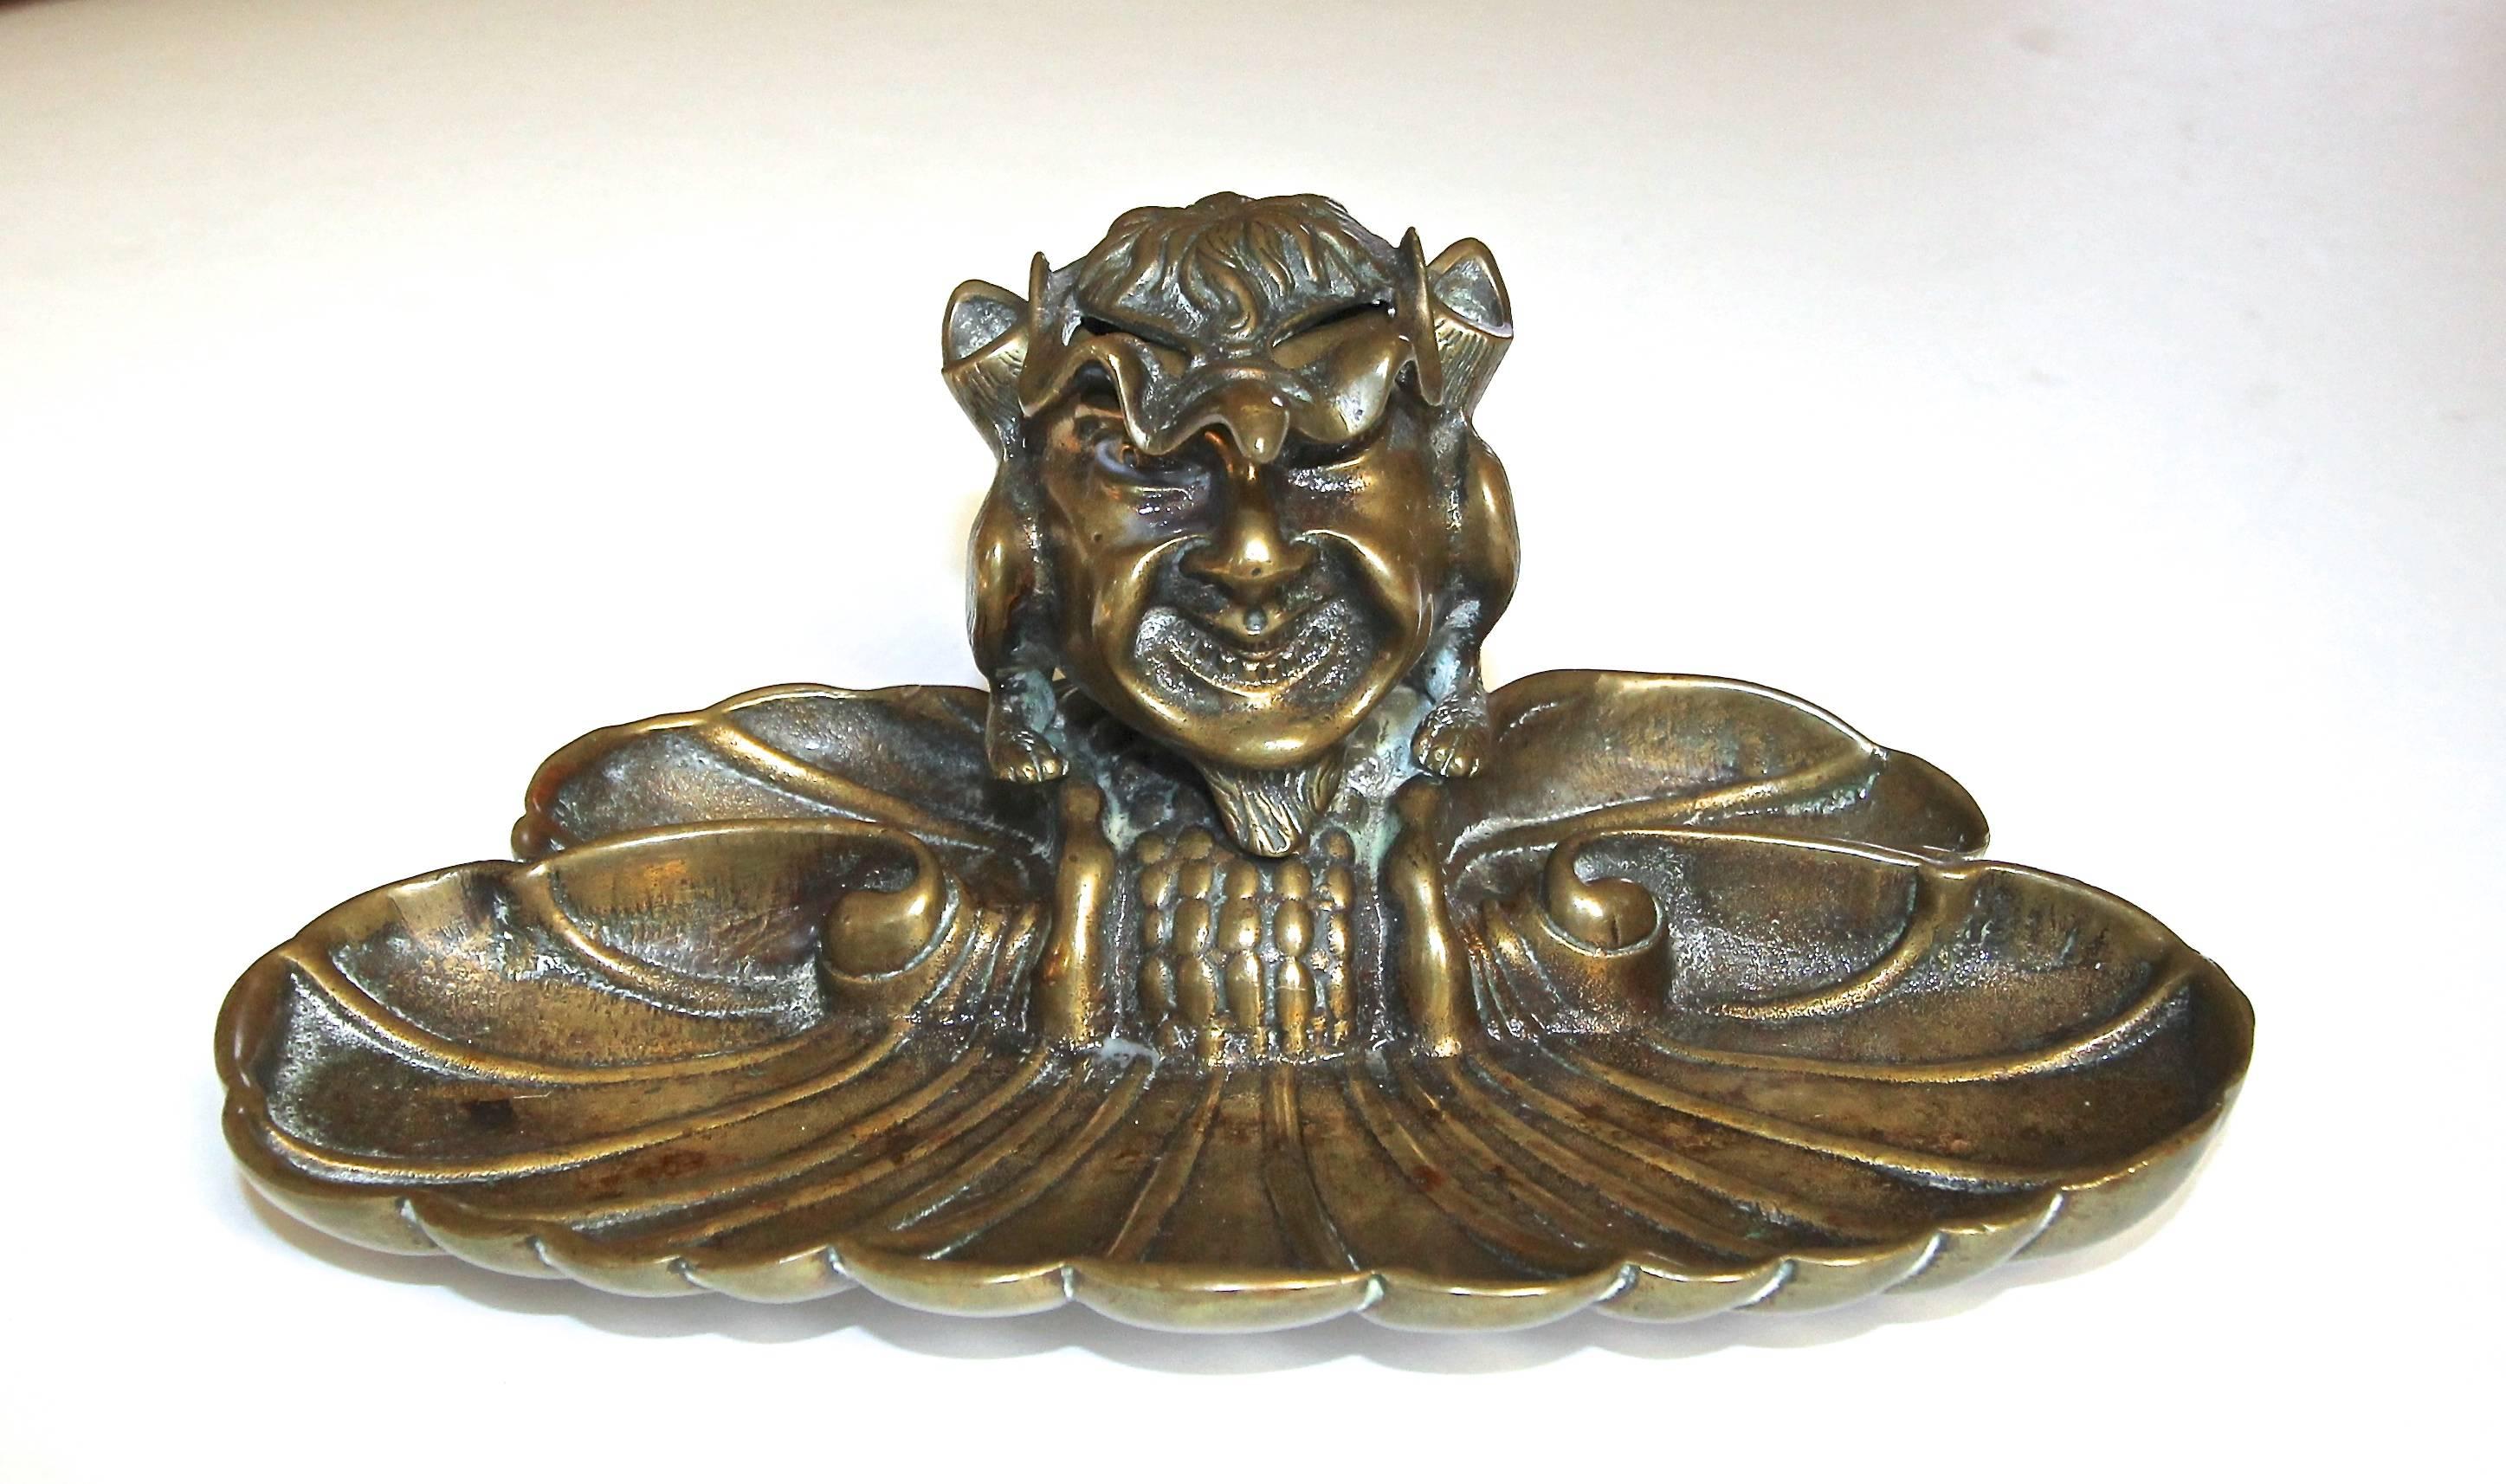 A whimsical bronze or brass late 19th or early 20th century inkwell with a grotesque style footed gargoyle mounted on a shell form base.